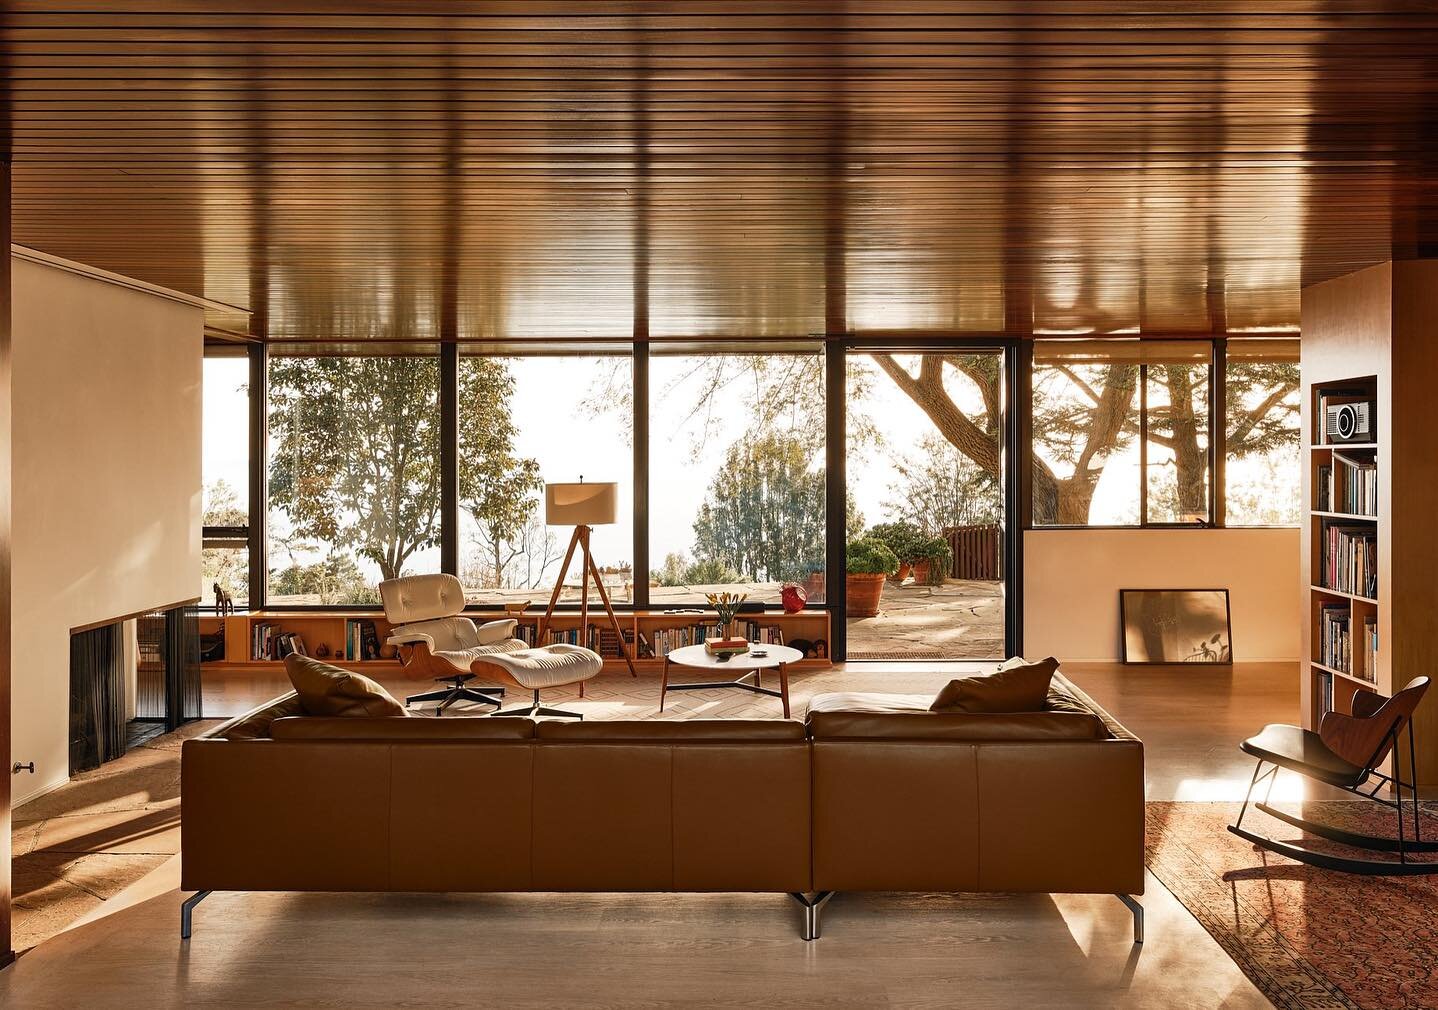 The Coe House by Richard Neutra is an exemplary embodiment of mid-century modern architecture overlooking the Palos Verdes Peninsula with unobstructed views of the coastline and Catalina Island. 

Neutra&rsquo;s artful manipulation of light enhances 